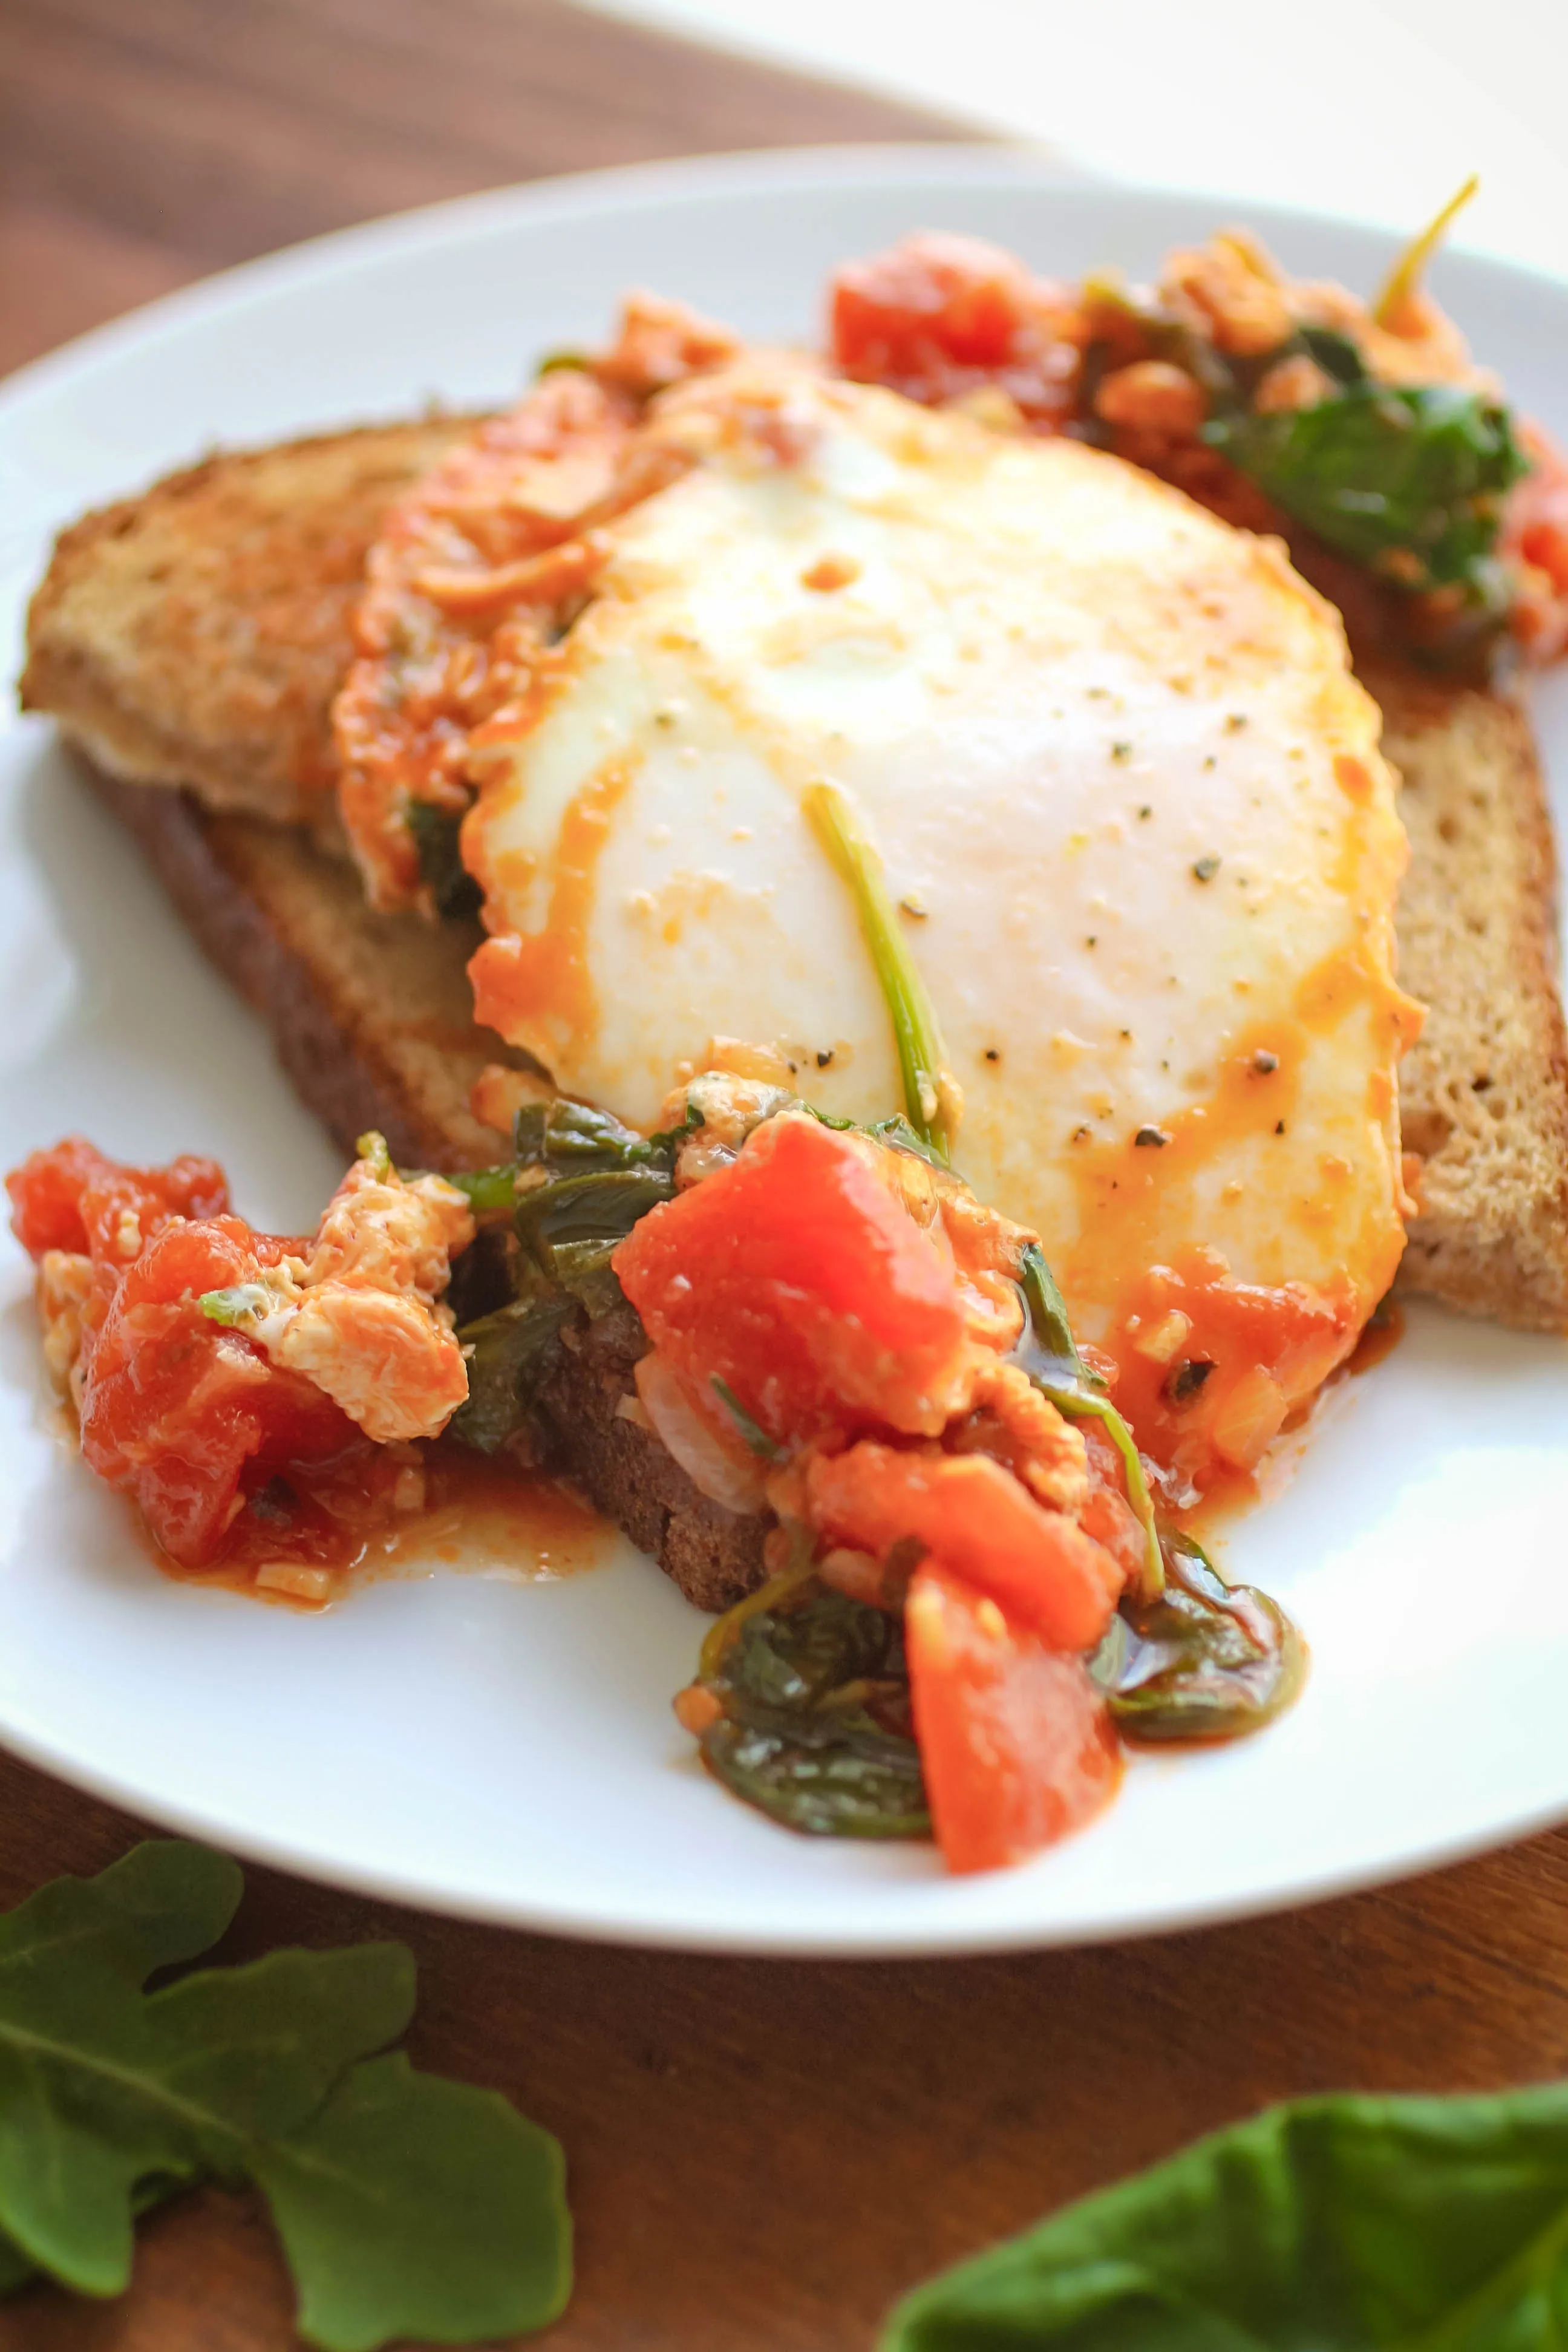 Eggs in Hatch Chile-Spiced Tomato Sauce is a great dish for any meal. Eggs in Hatch Chile-Spiced Tomato Sauce is a delightful dish to serve for any meal.